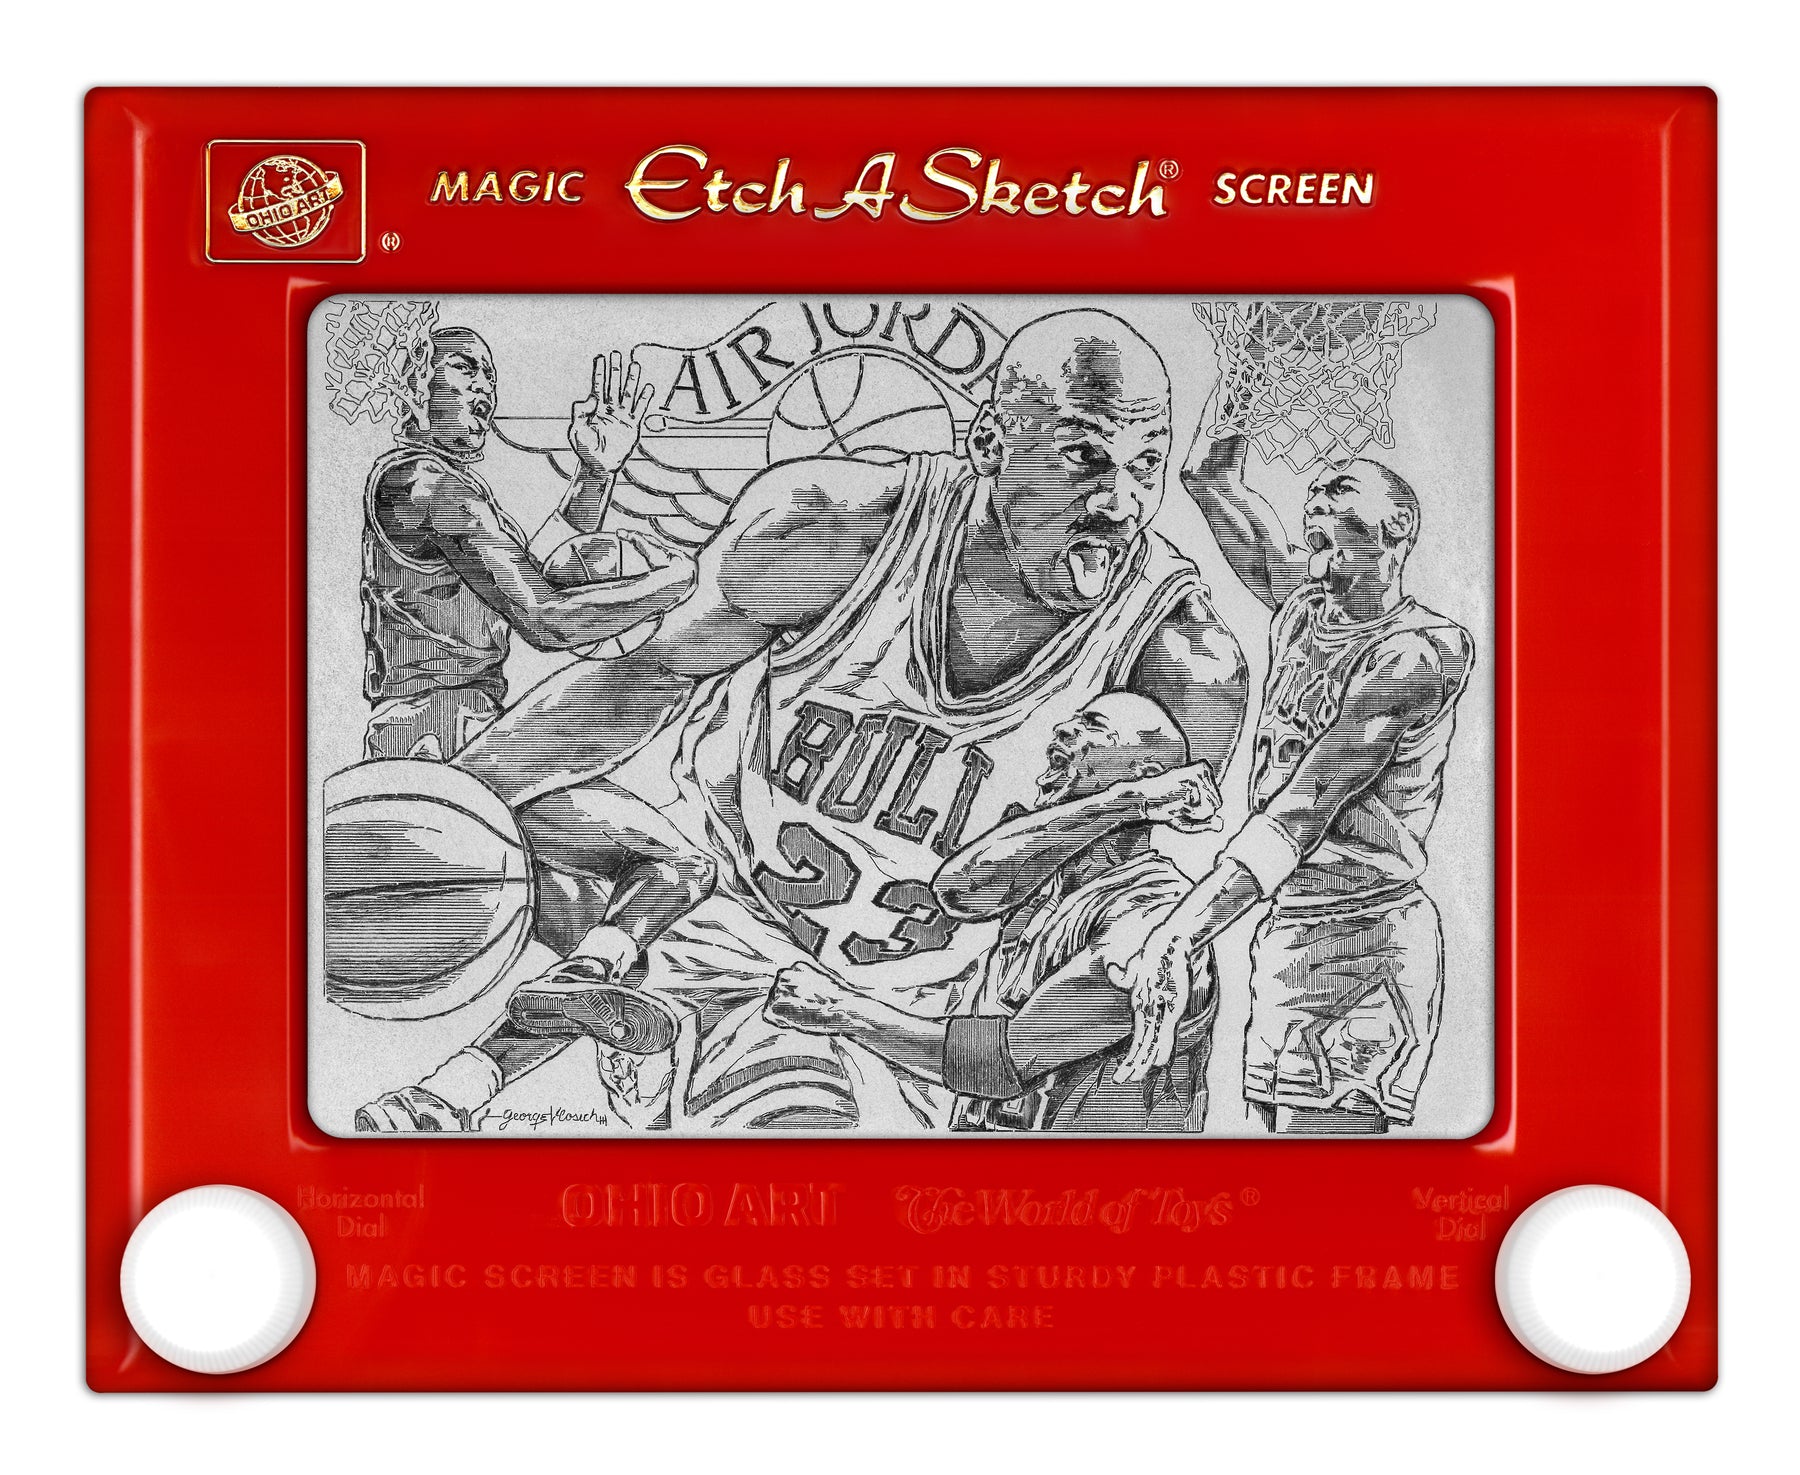 TOY STORY CLASSIC ETCH A SKETCH - GTIN/EAN/UPC 265115054762 - Product  Details - Cosmos